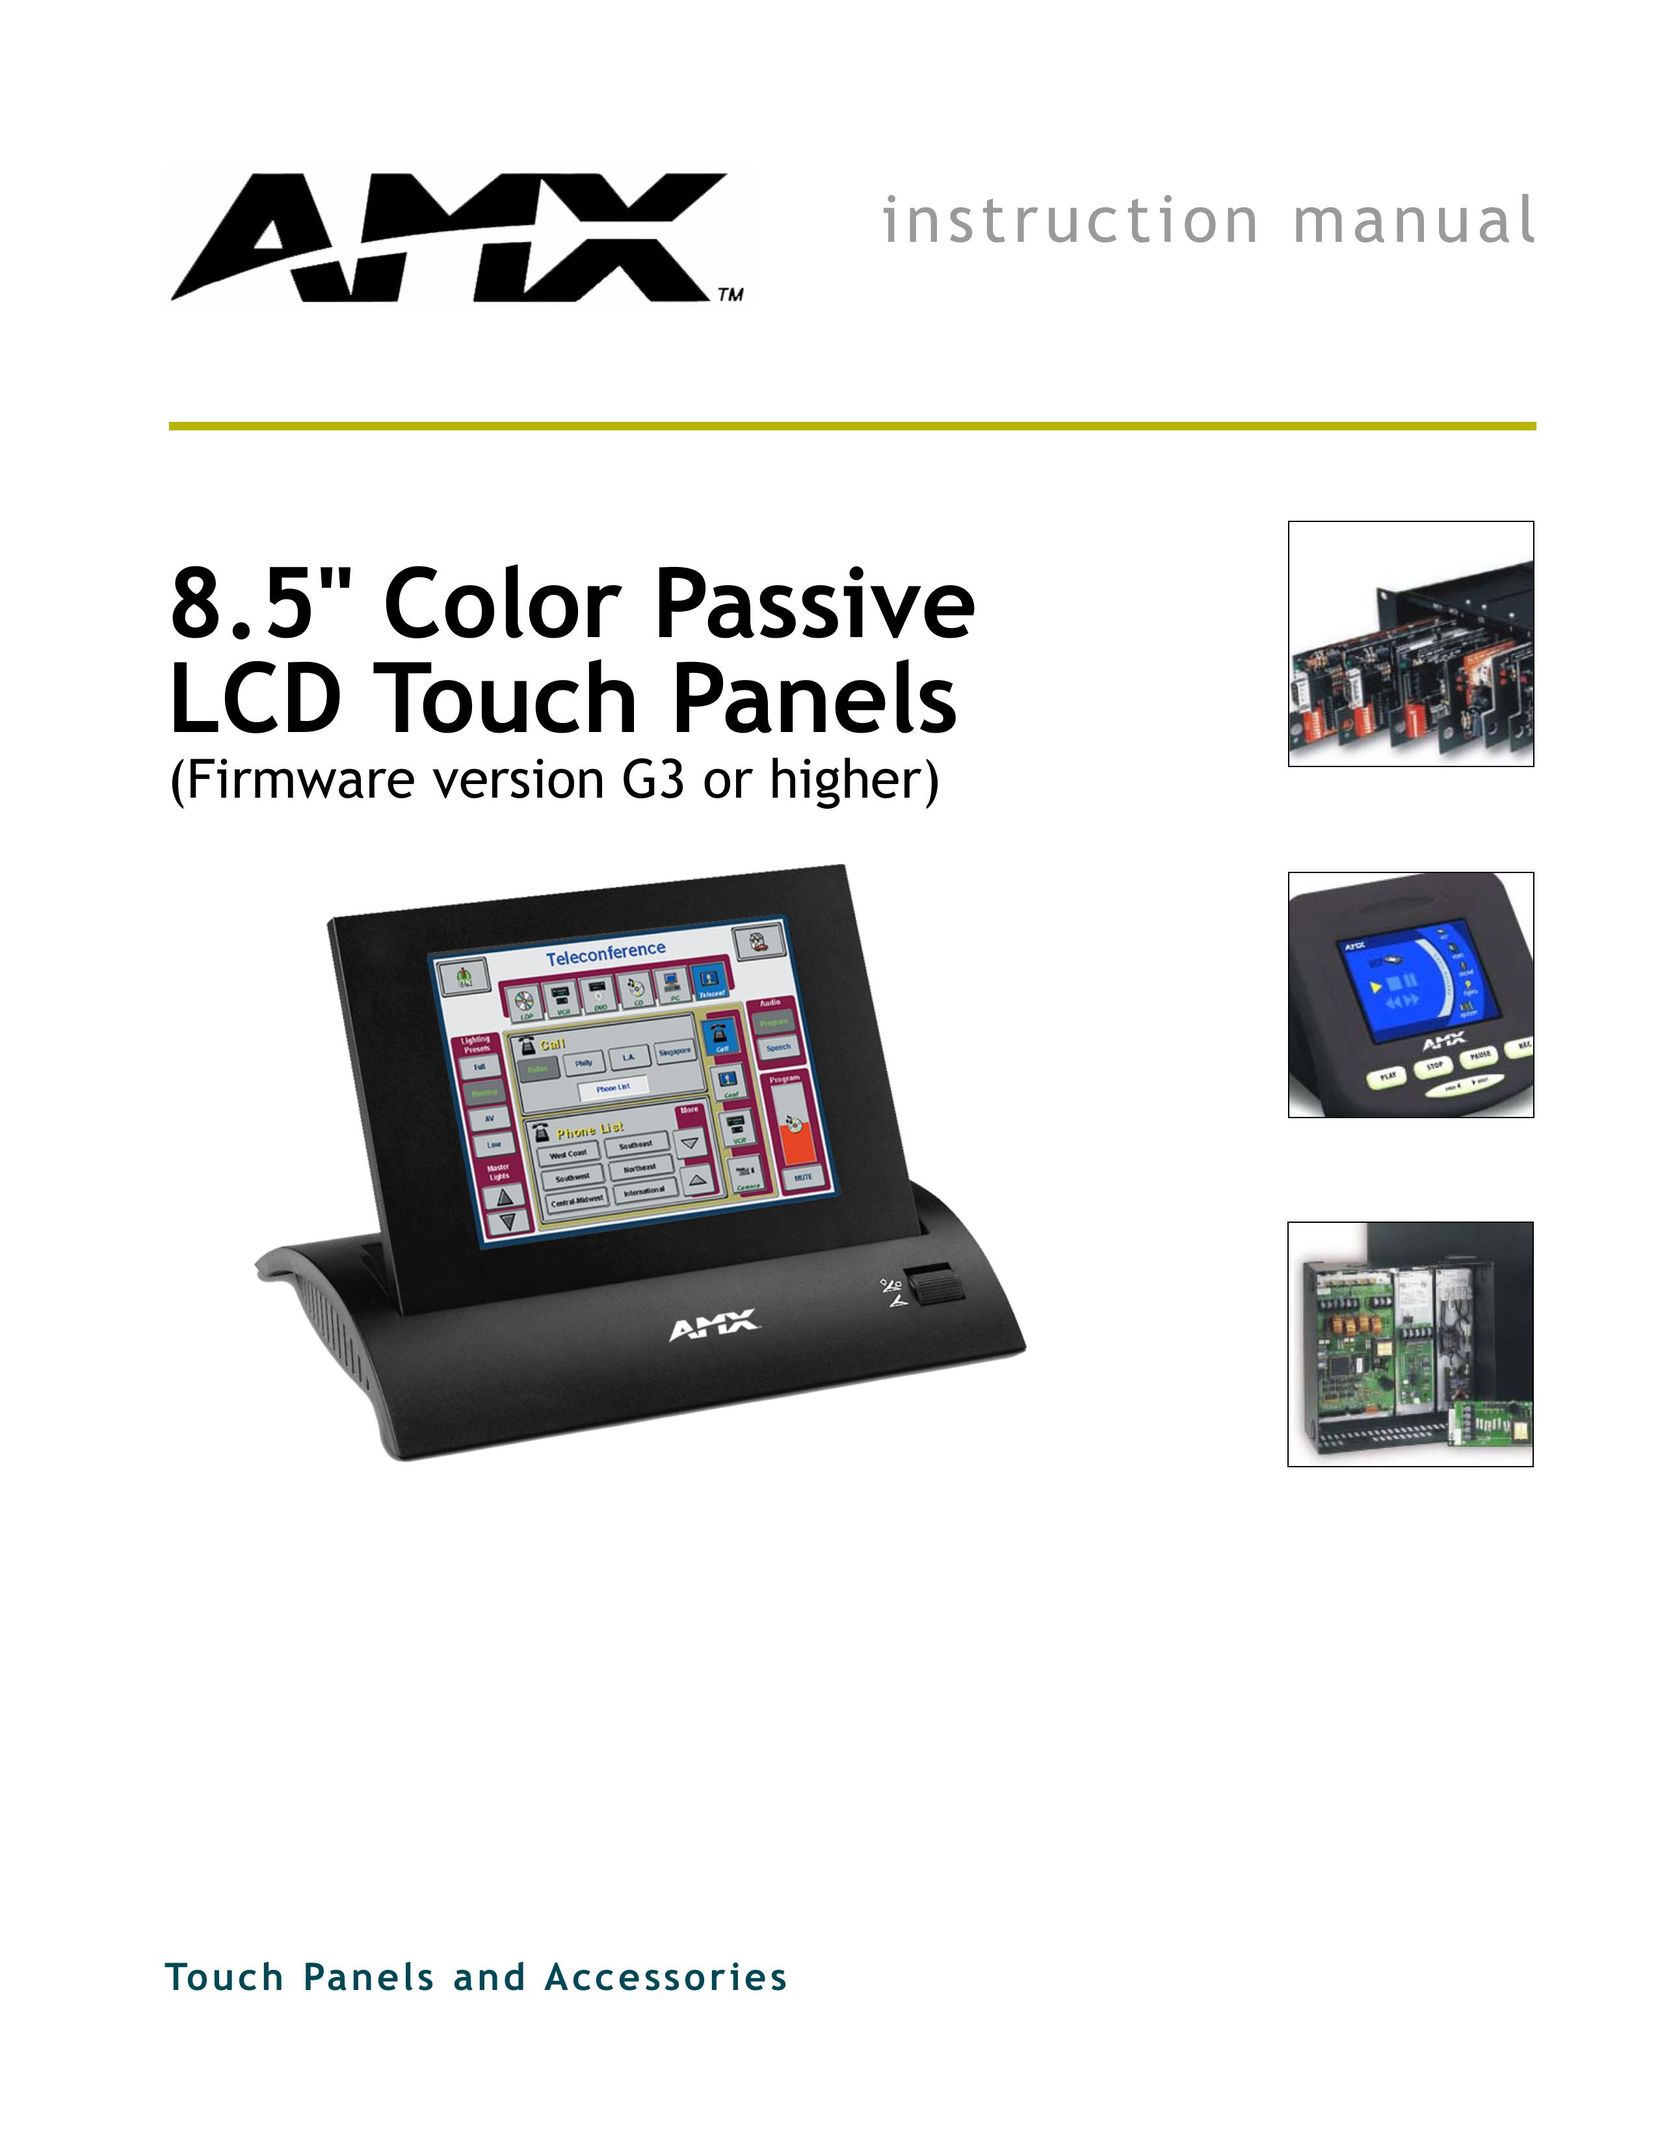 AMX 8.5" Color Passive LCD Touch Panels Car Video System User Manual